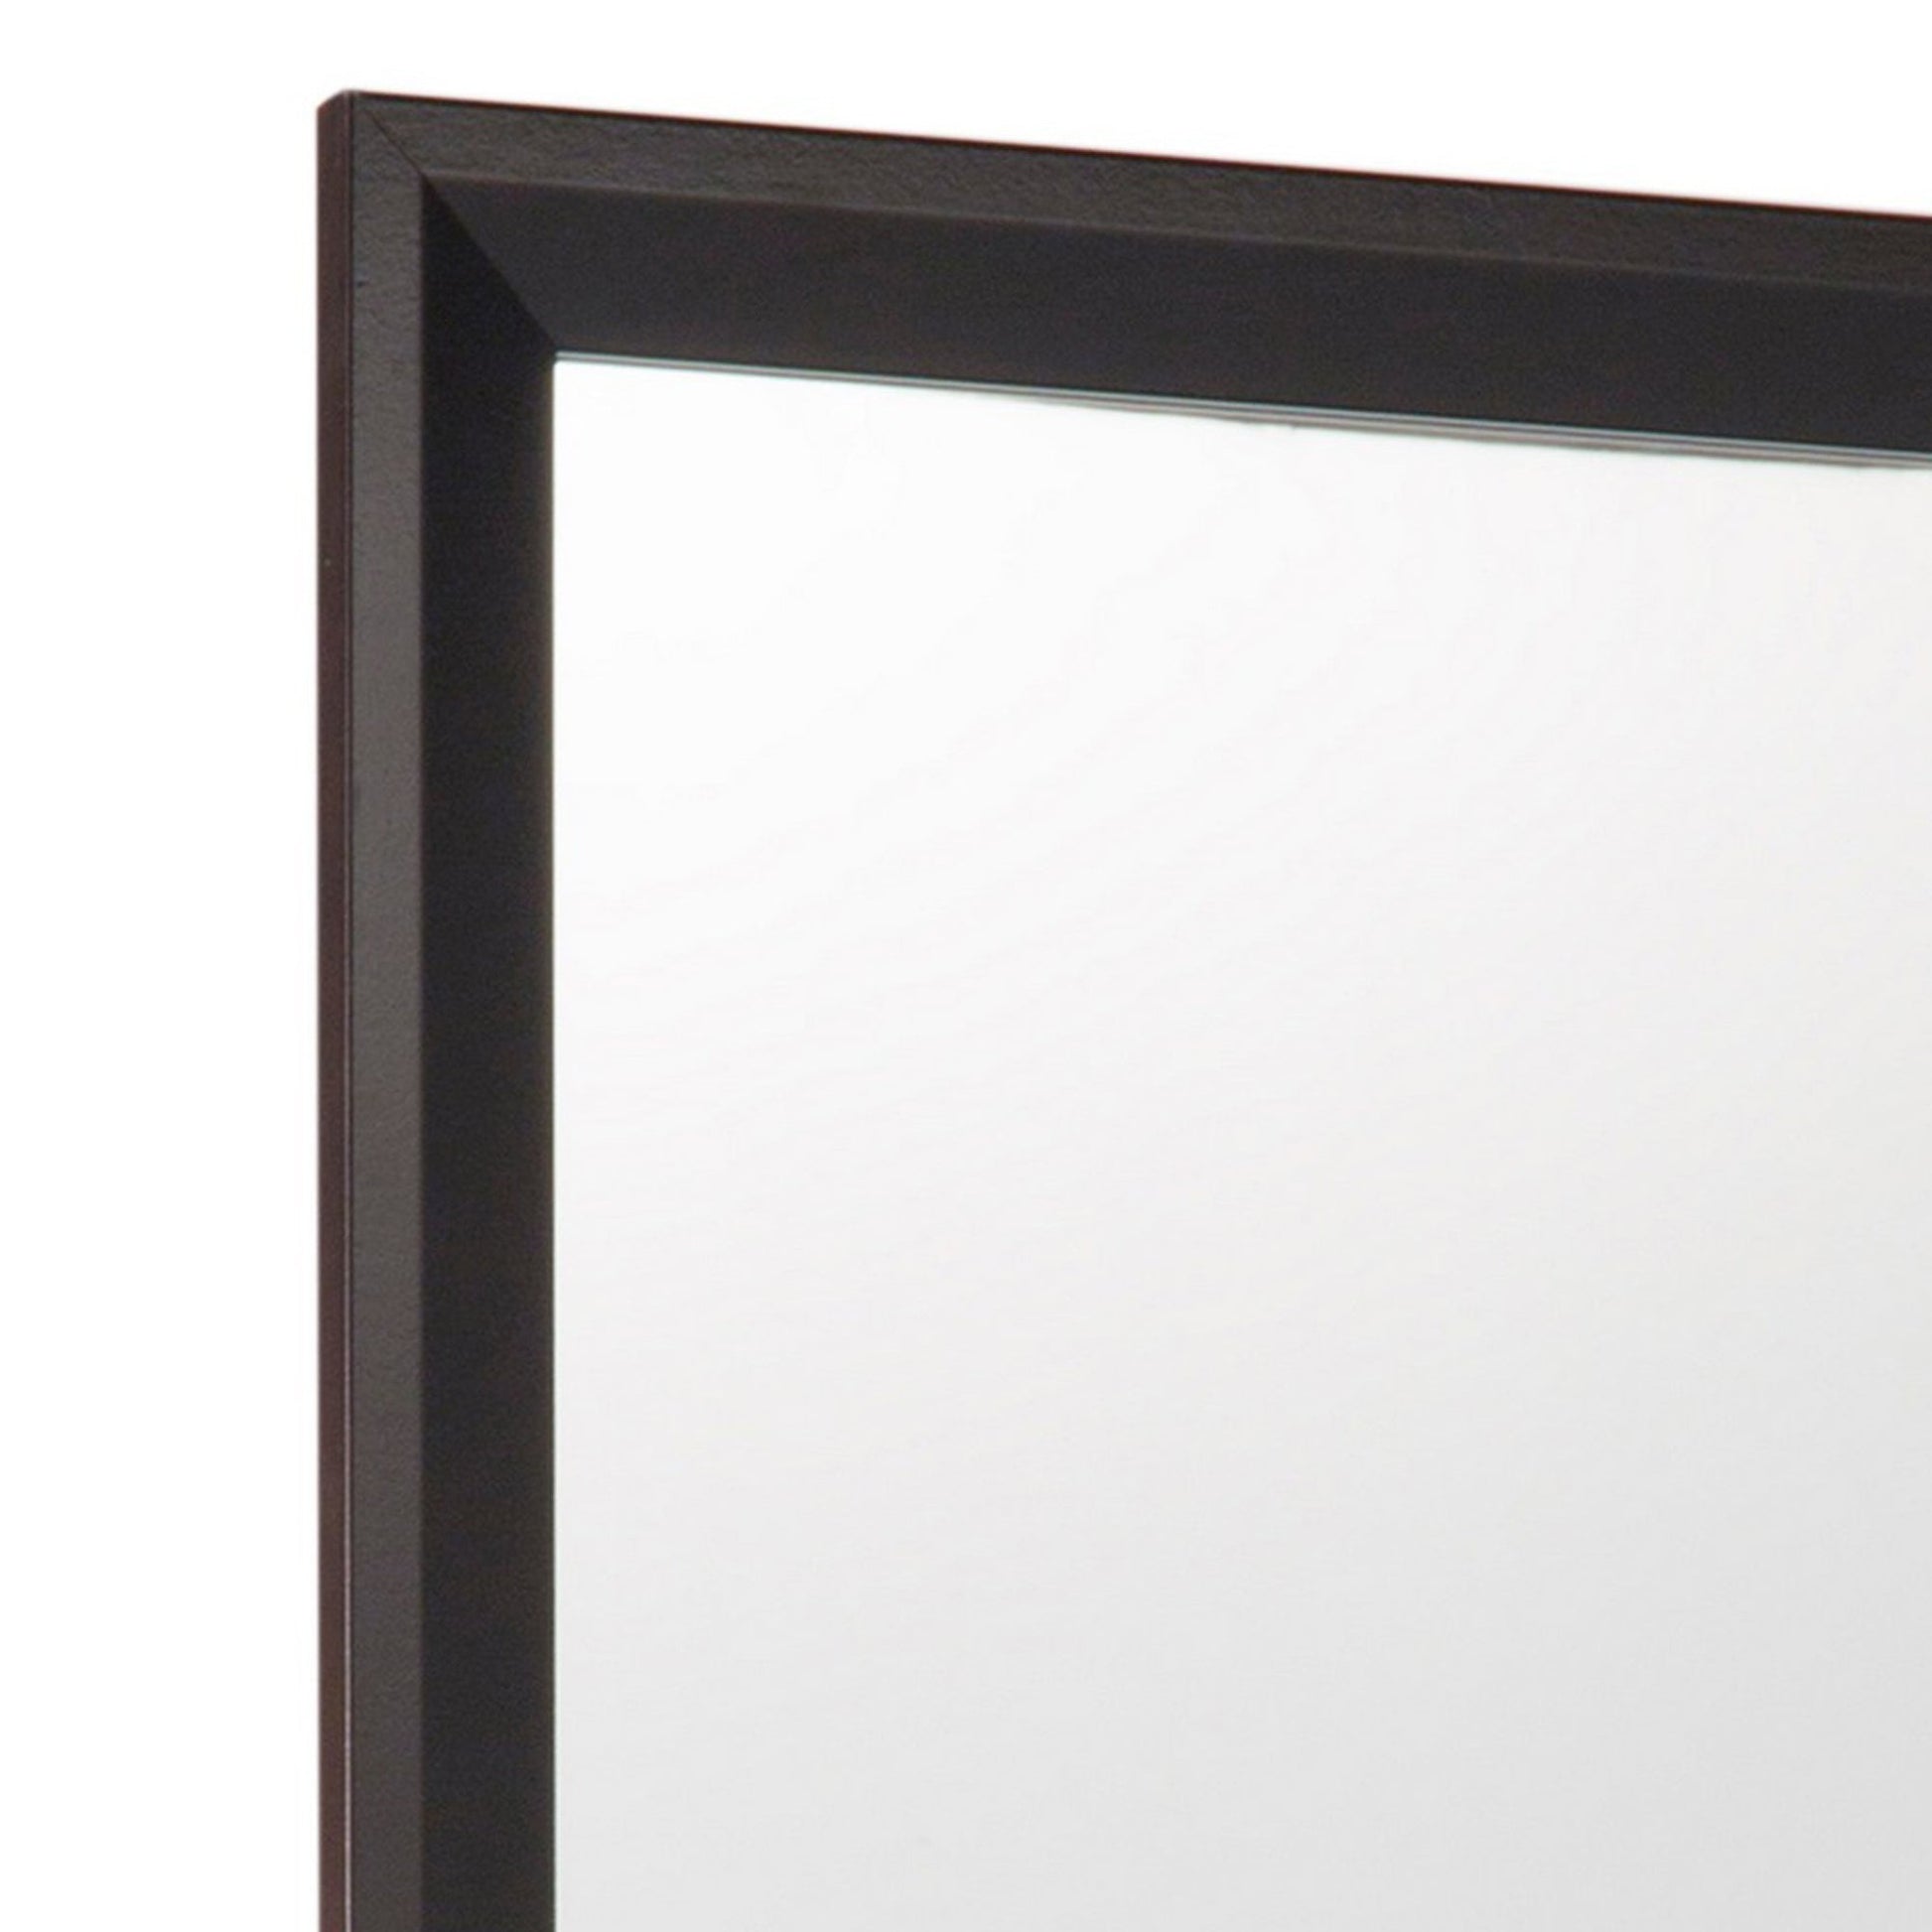 Benzara Cherry Brown and Silver Square Wooden Frame Mirror With Mounting Hardware